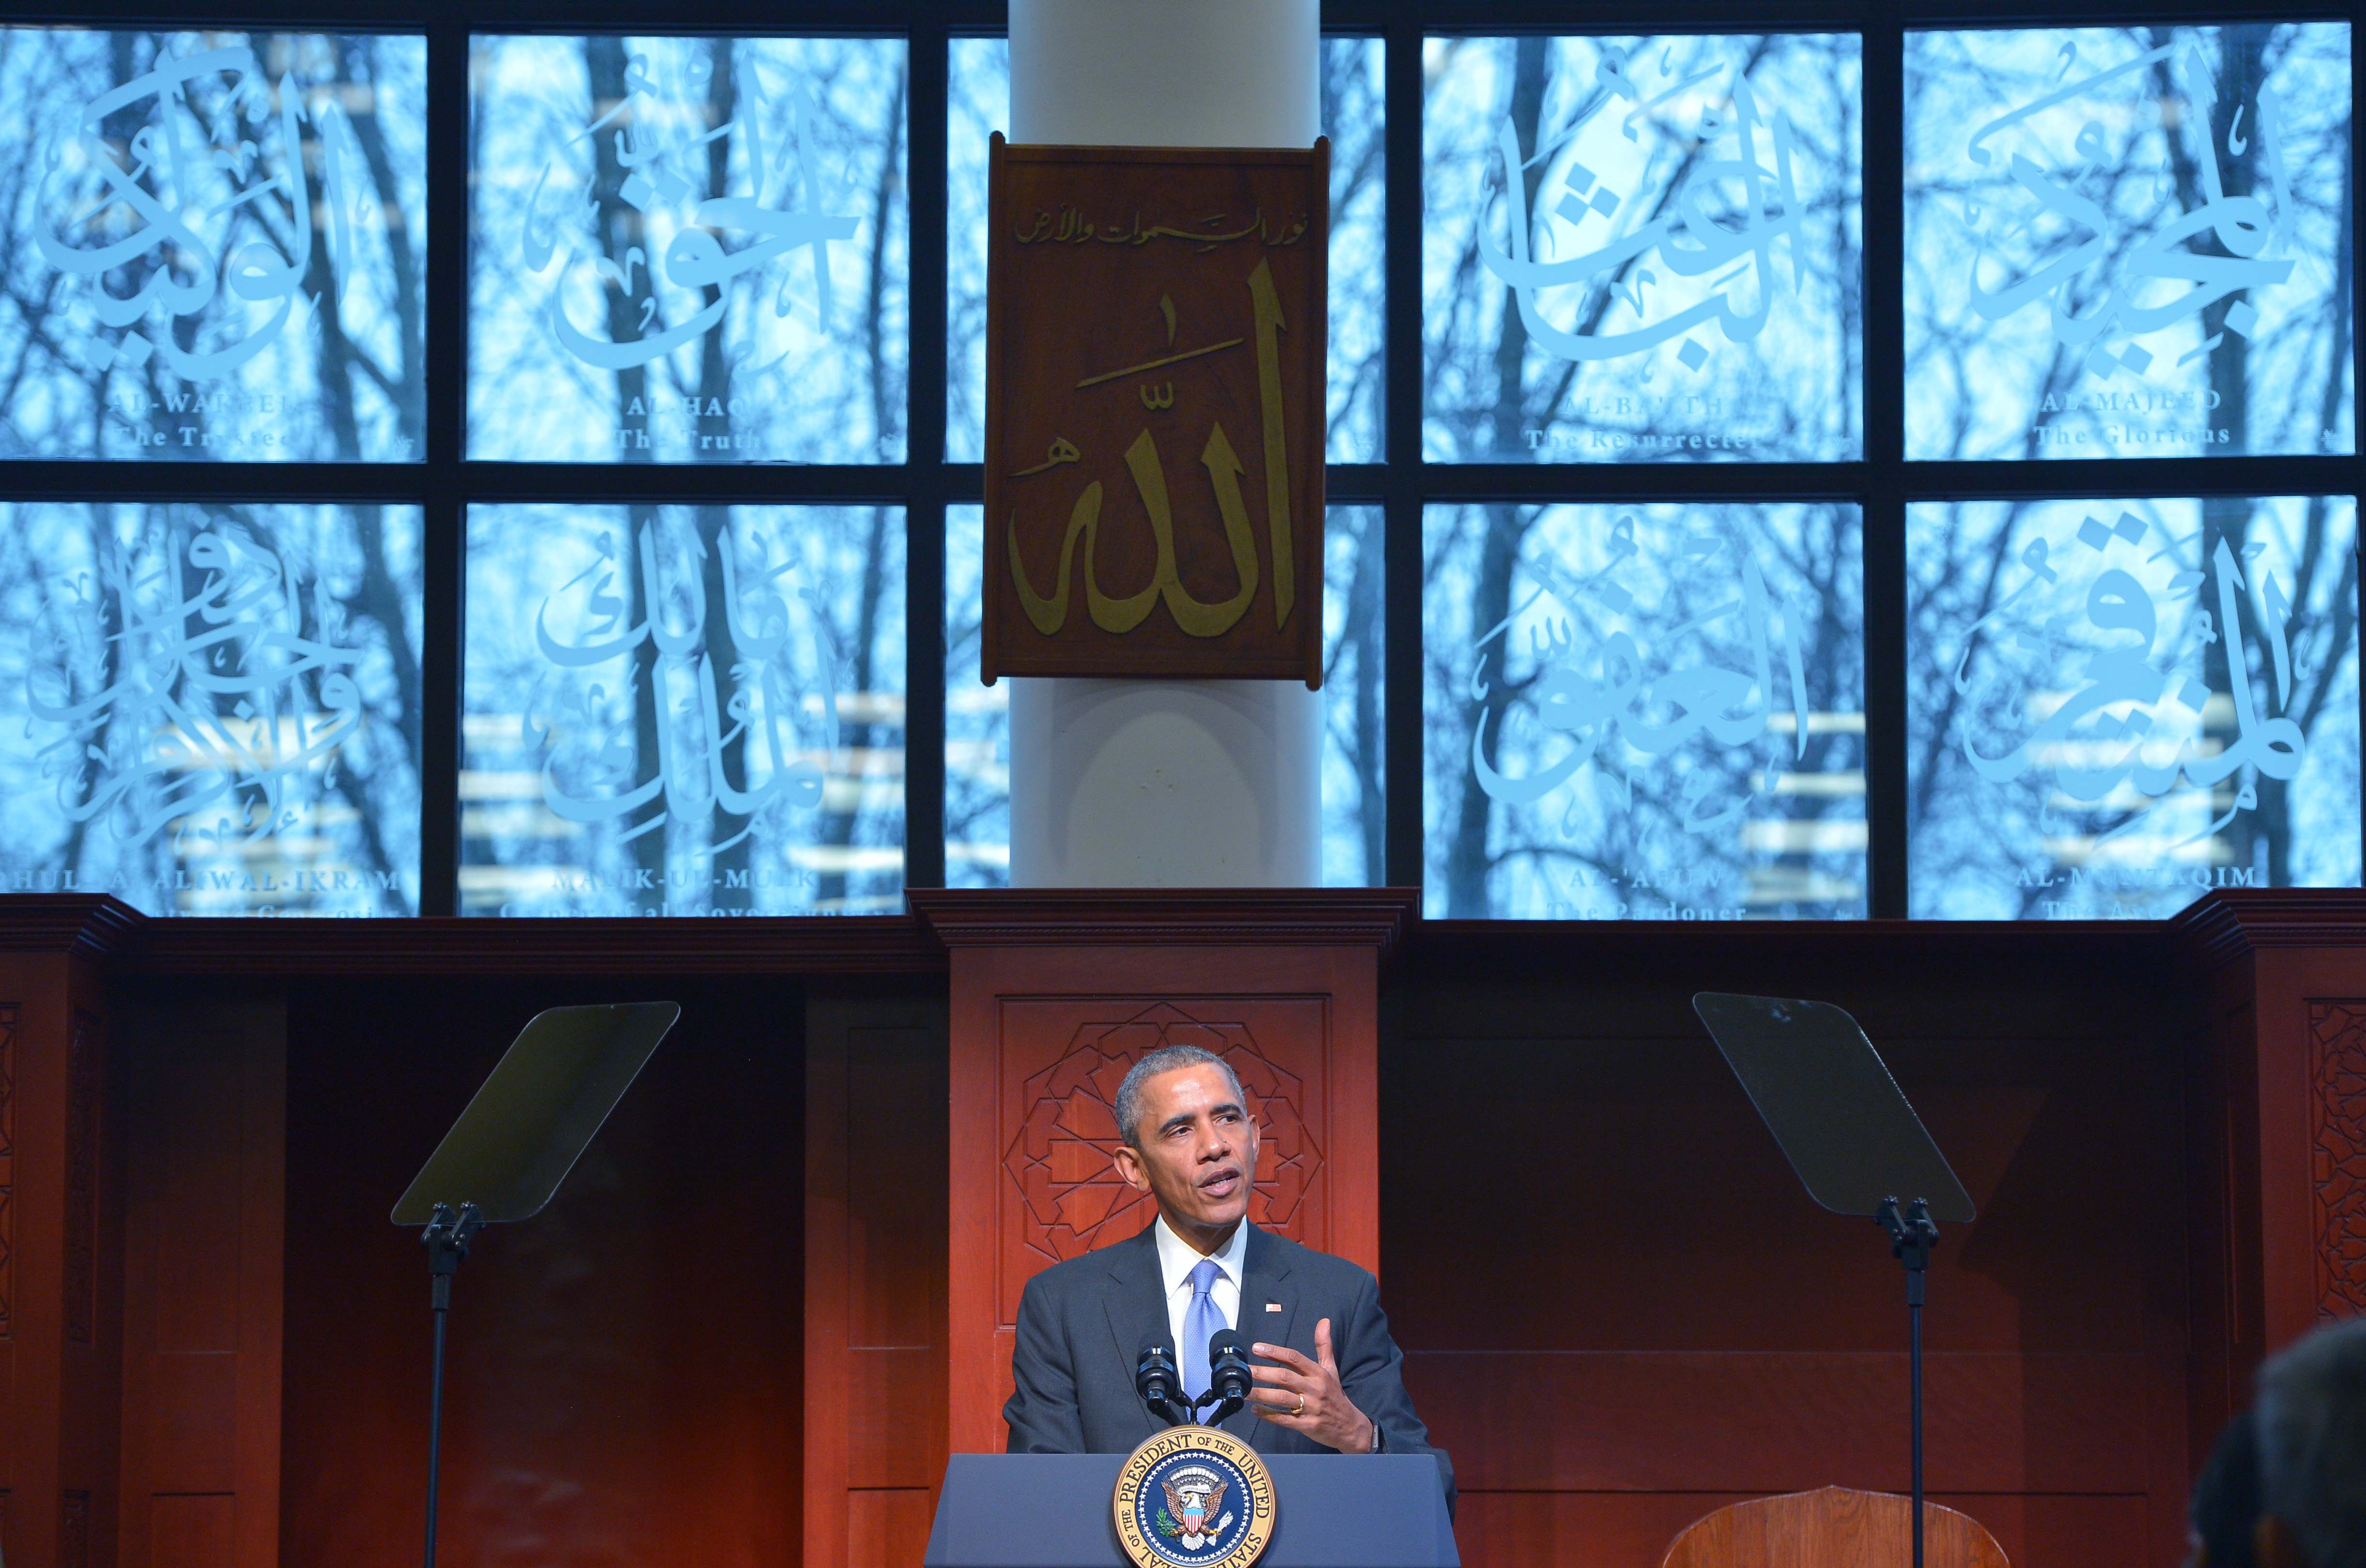 US President Barack Obama speaks at the Islamic Society of Baltimore, in Windsor Mill, Maryland on February 3, 2016. / AFP / MANDEL NGAN        (Photo credit should read MANDEL NGAN/AFP/Getty Images)